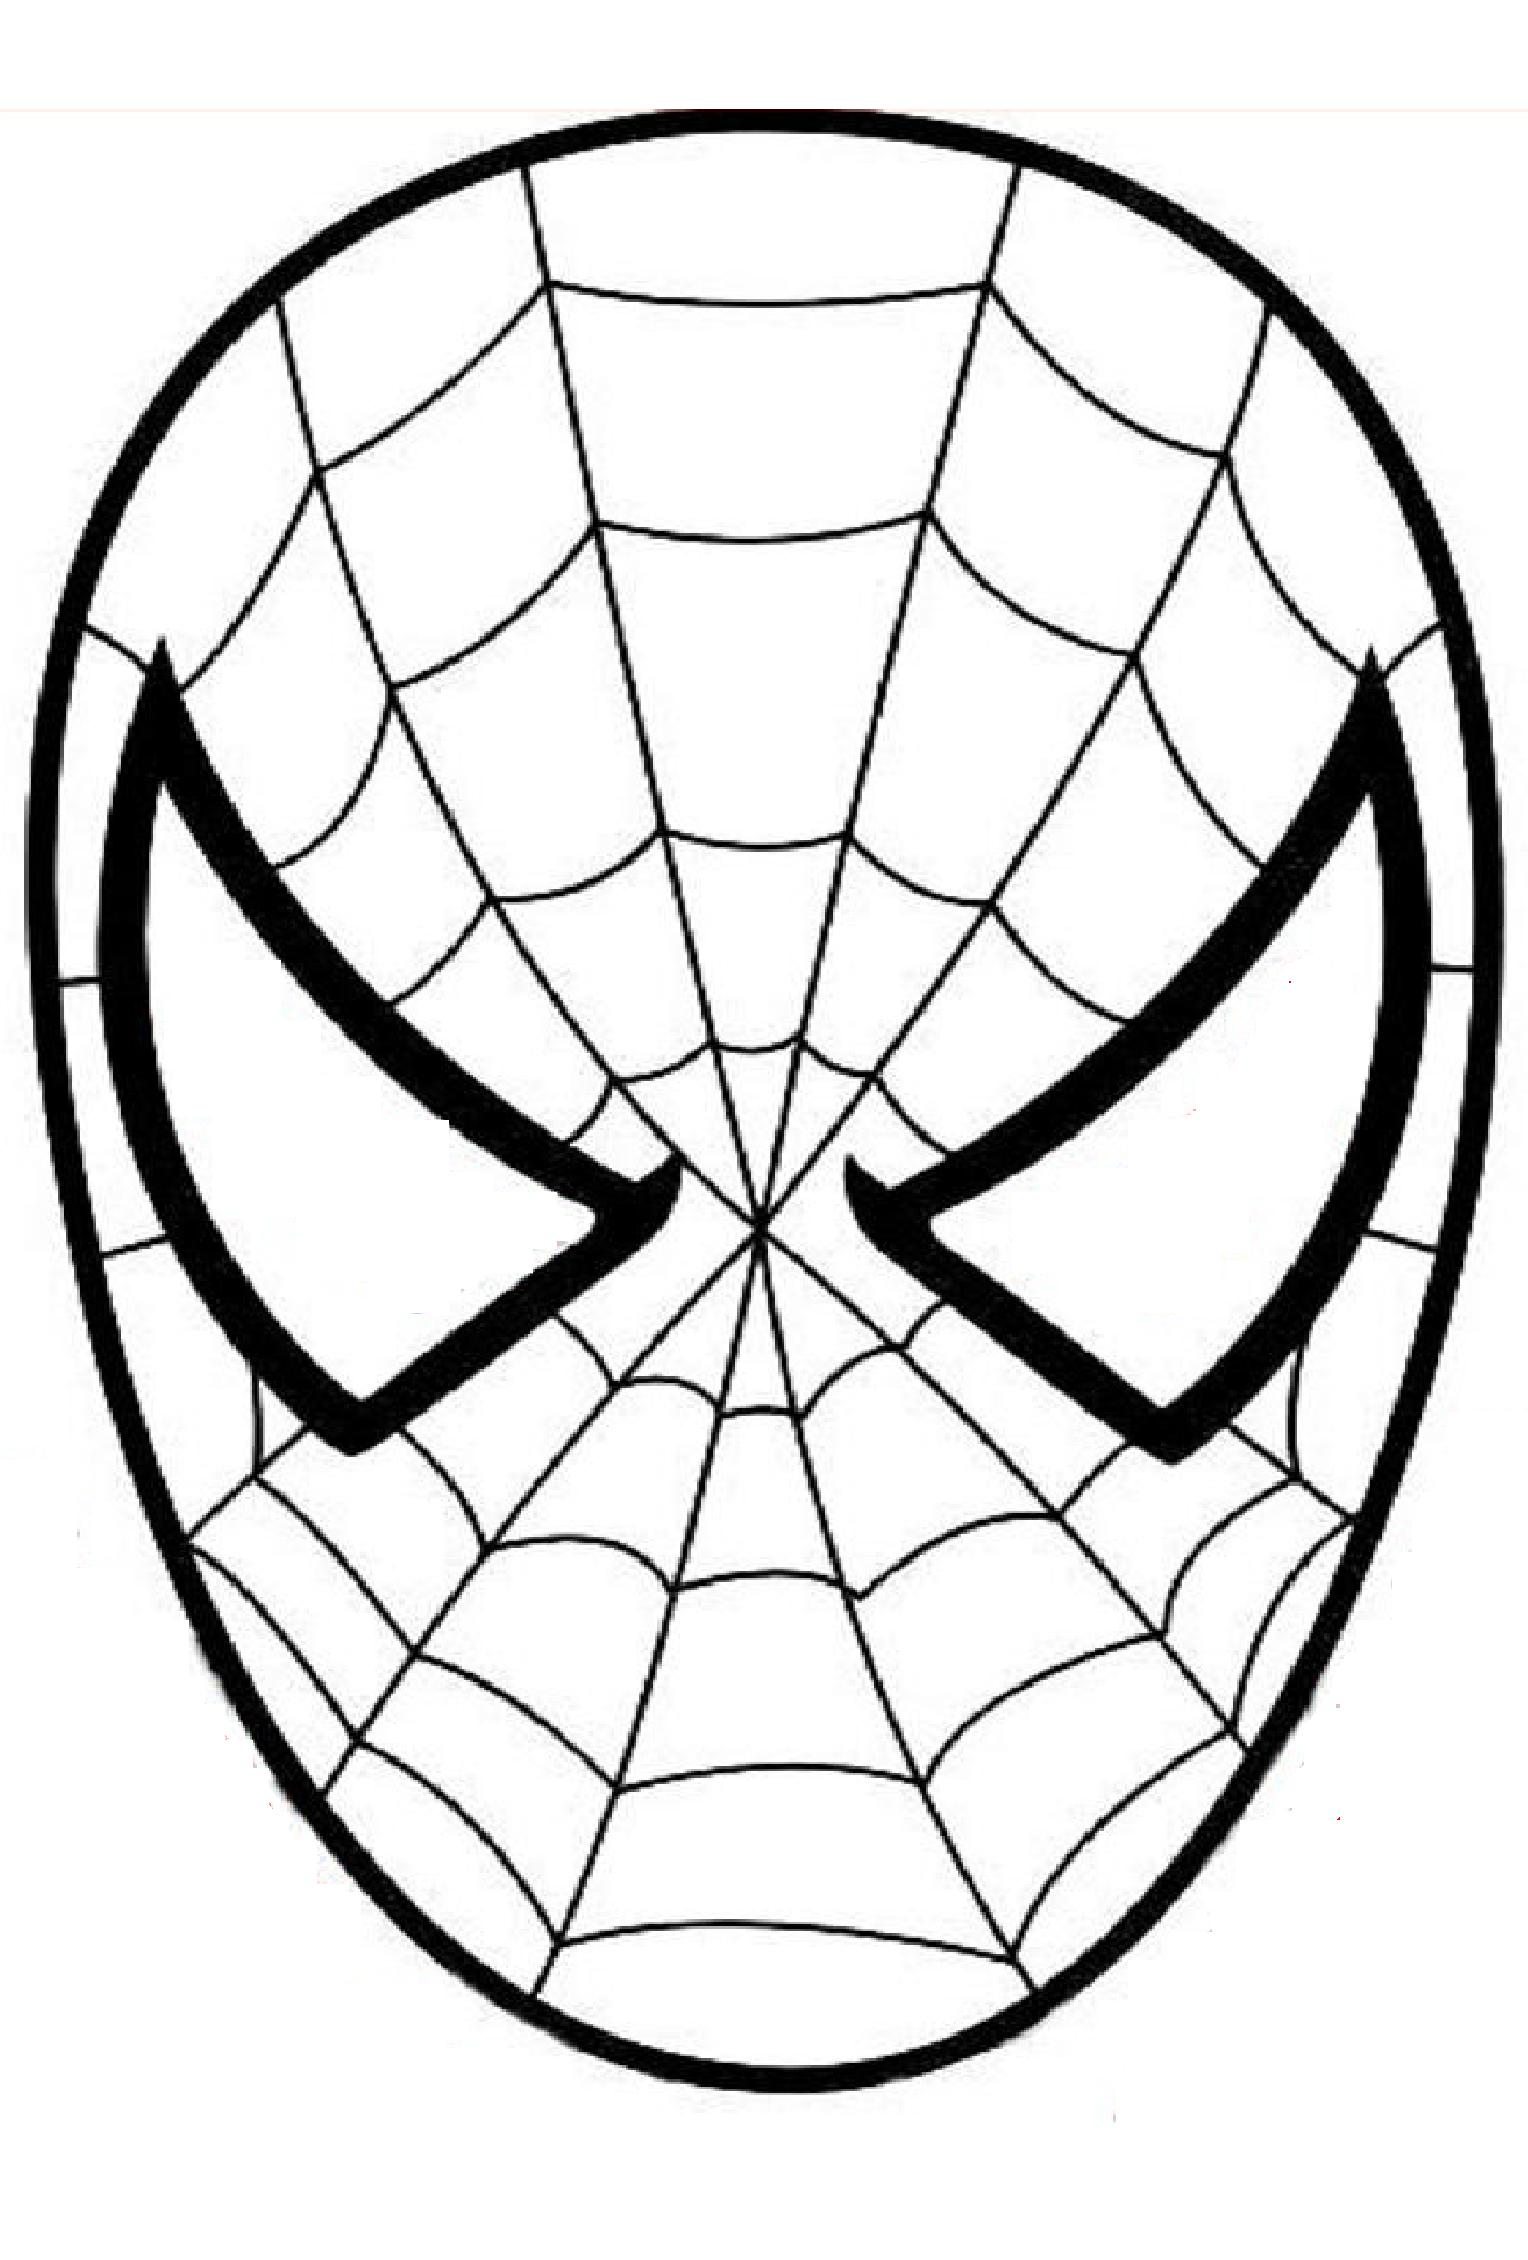 Image of Spiderman to download and color Spiderman Kids Coloring Pages